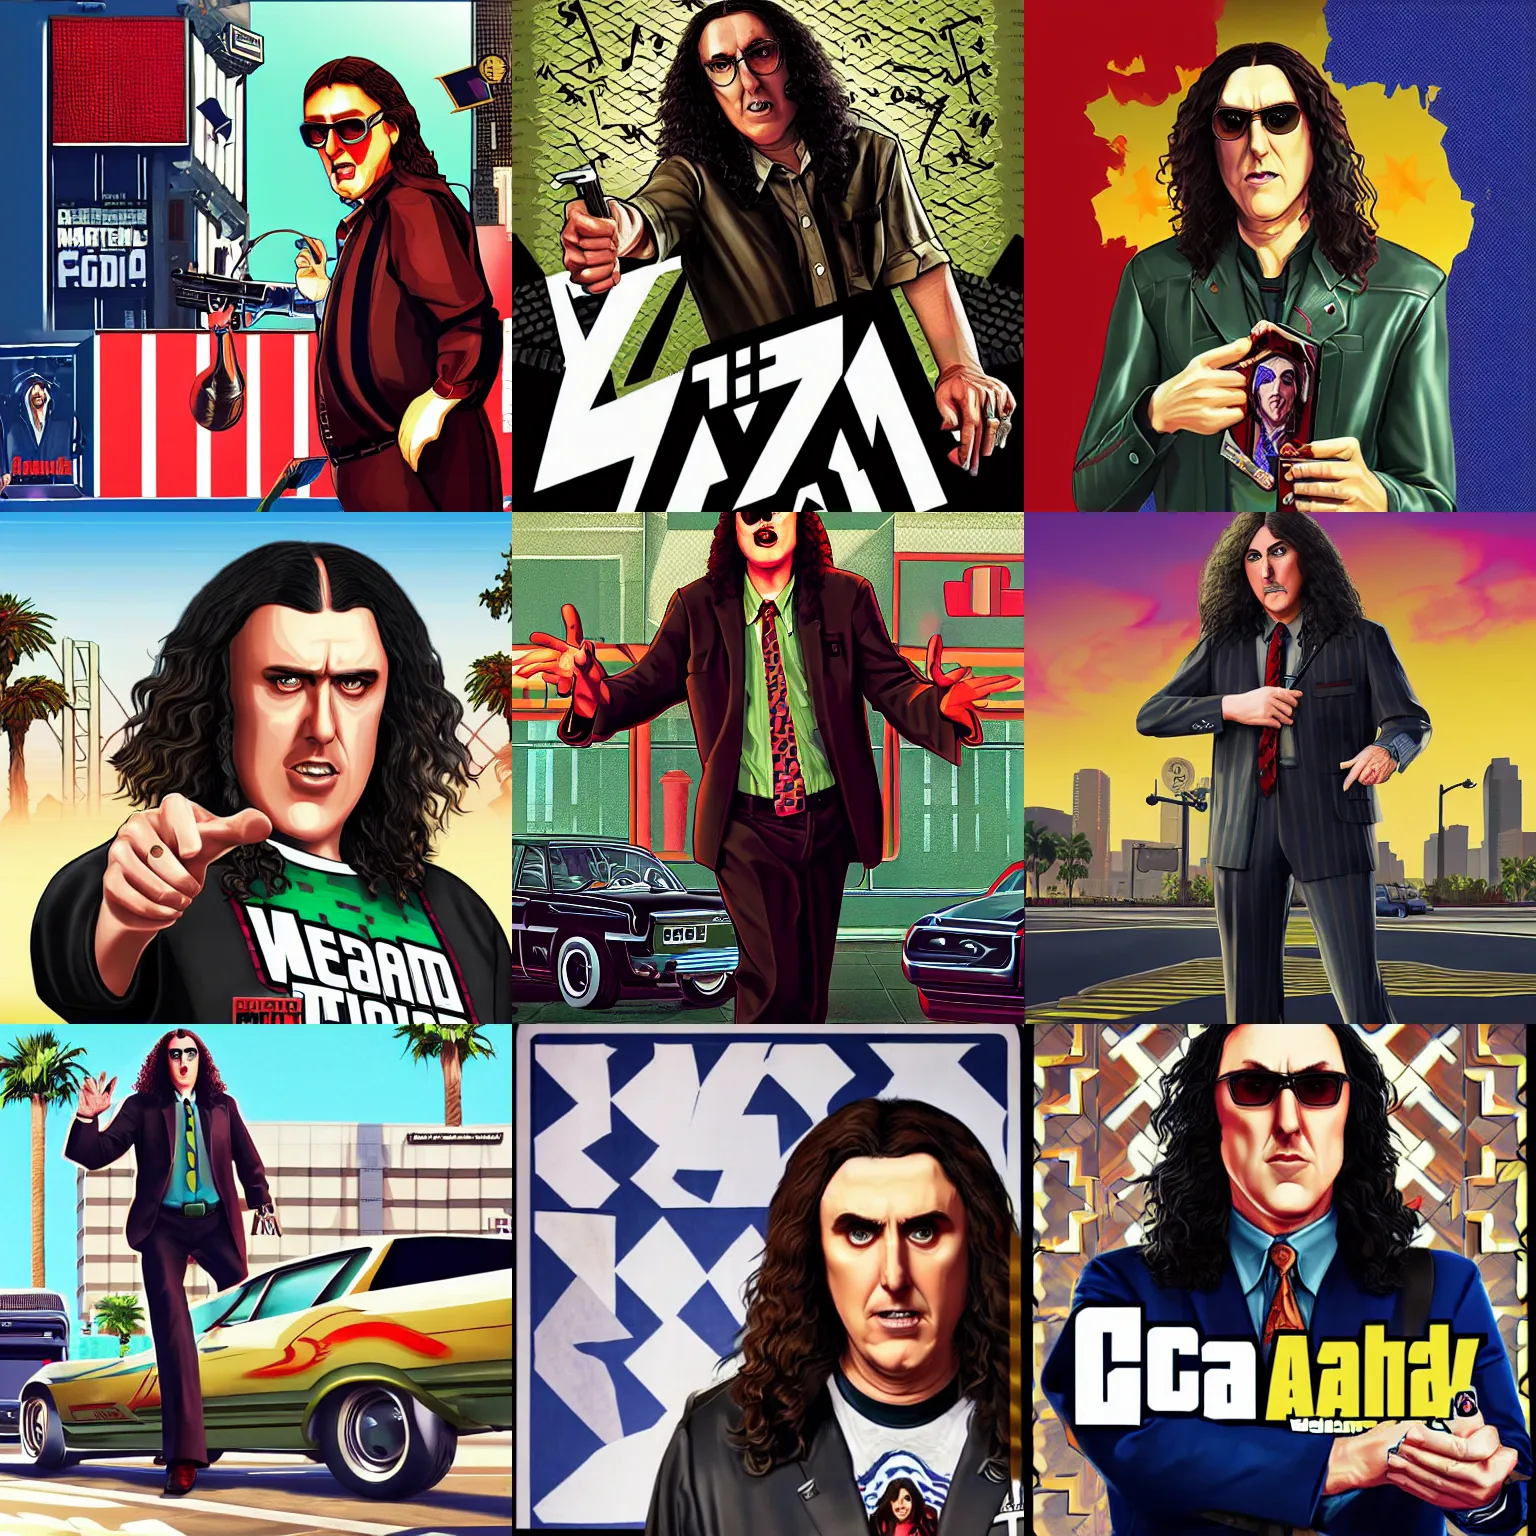 Prompt: weird al yankovic in gta v promotional art by stephen bliss, no text